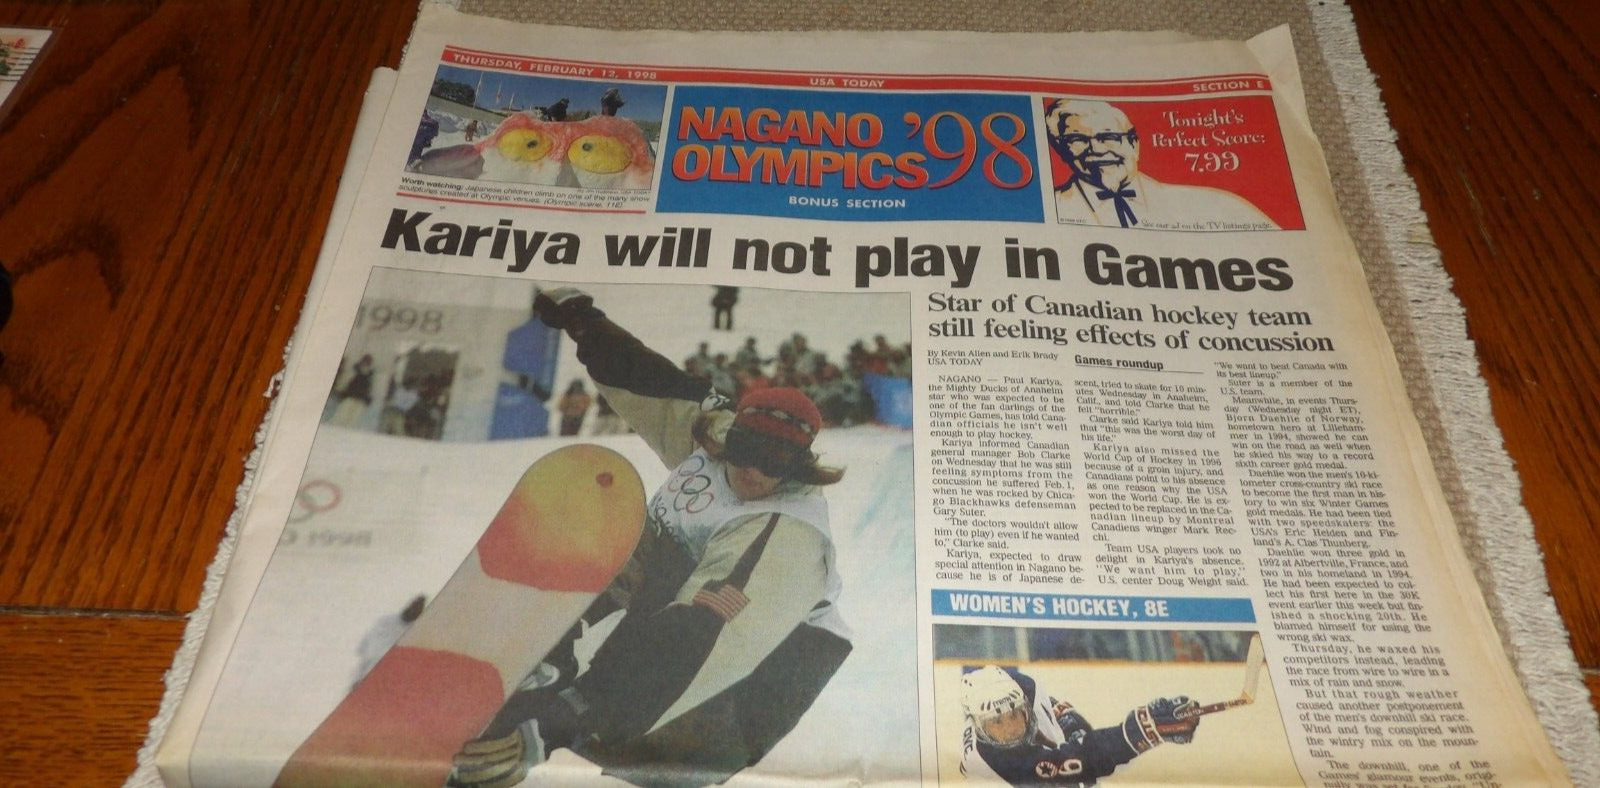 Feb 12, 1998 USA Today Sports section-Early Snowboarding in the Olympics